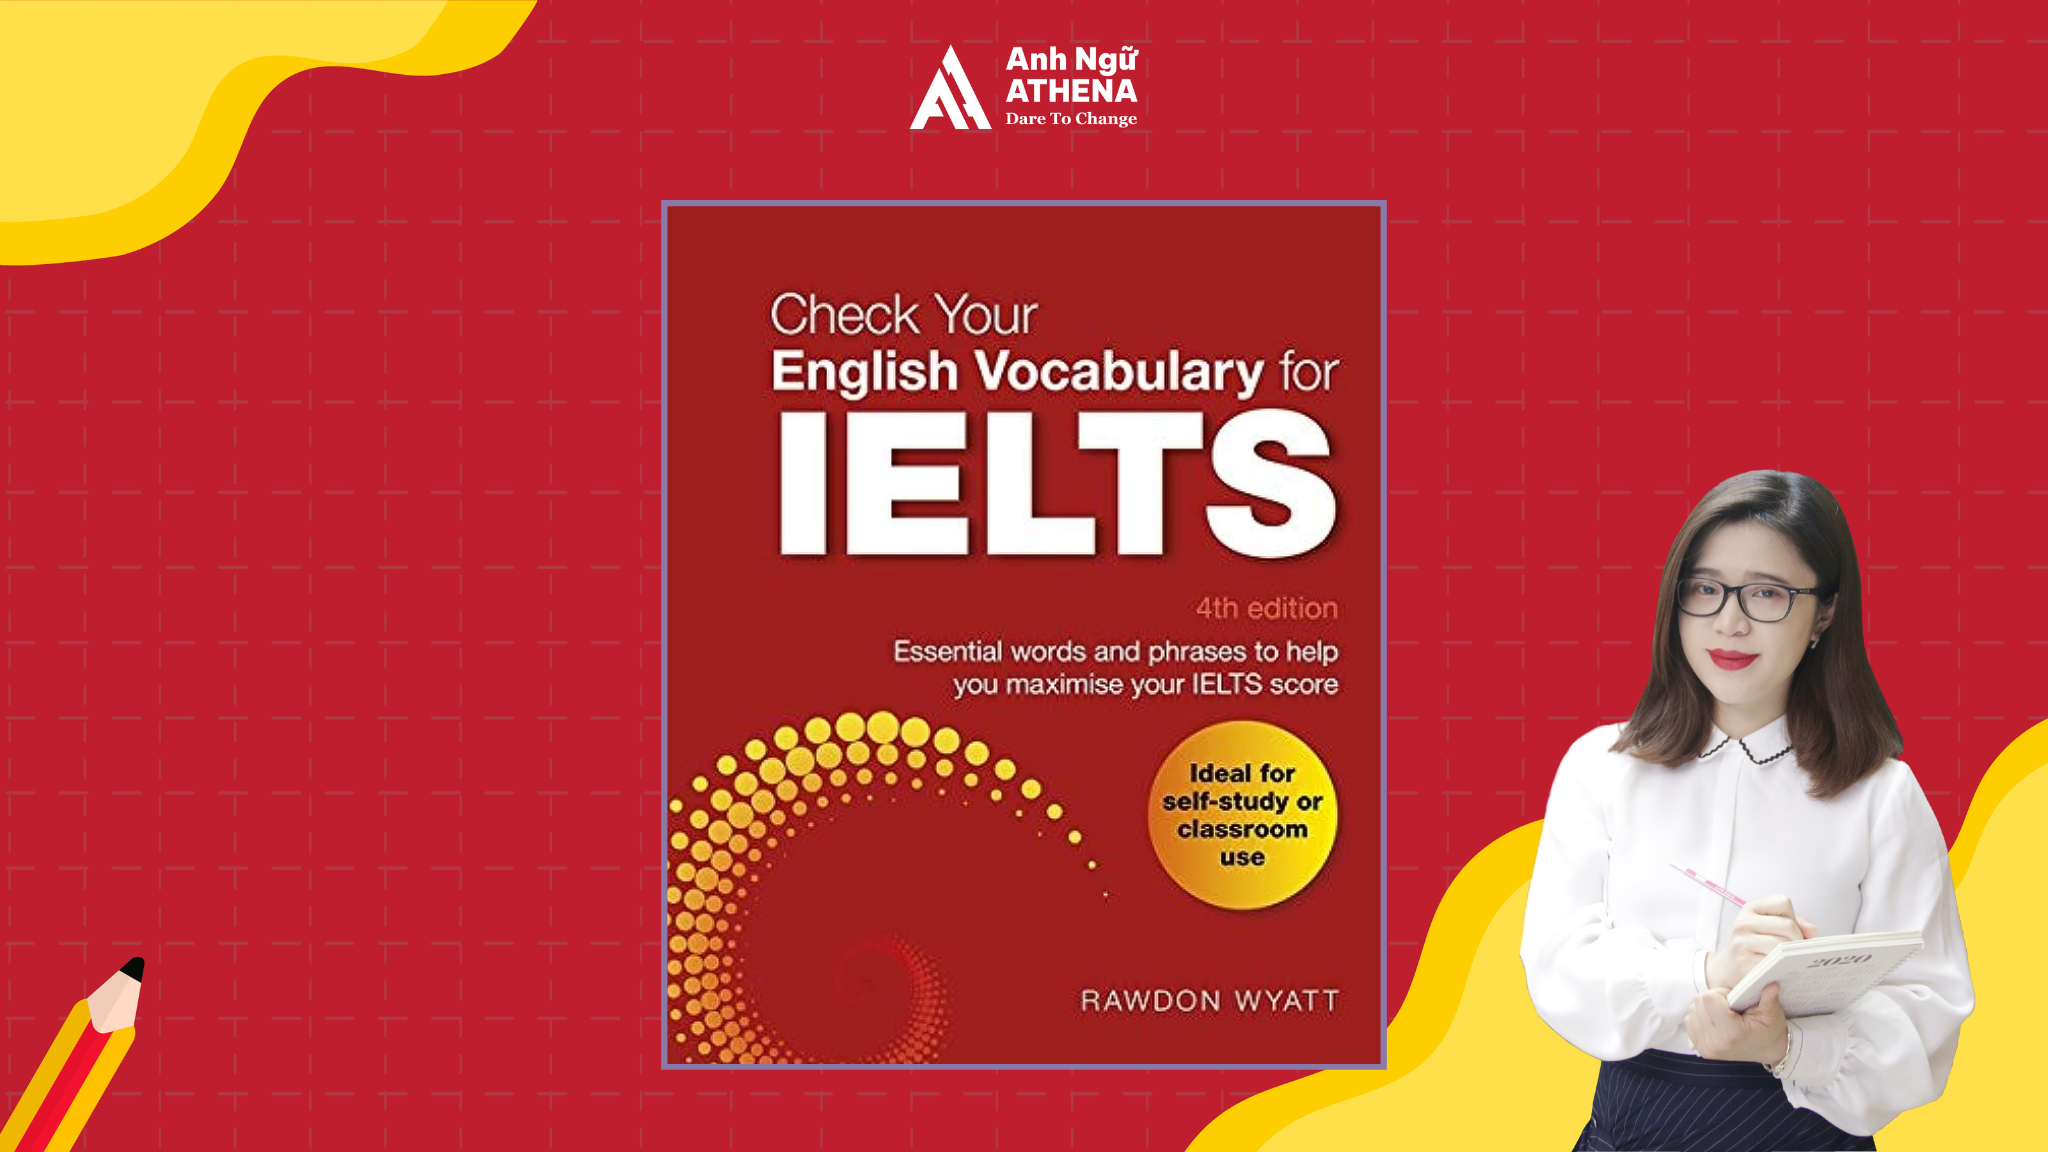 Sách “Check Your English Vocabulary for IELTS” tự học Speaking band 5.0 - 6.0